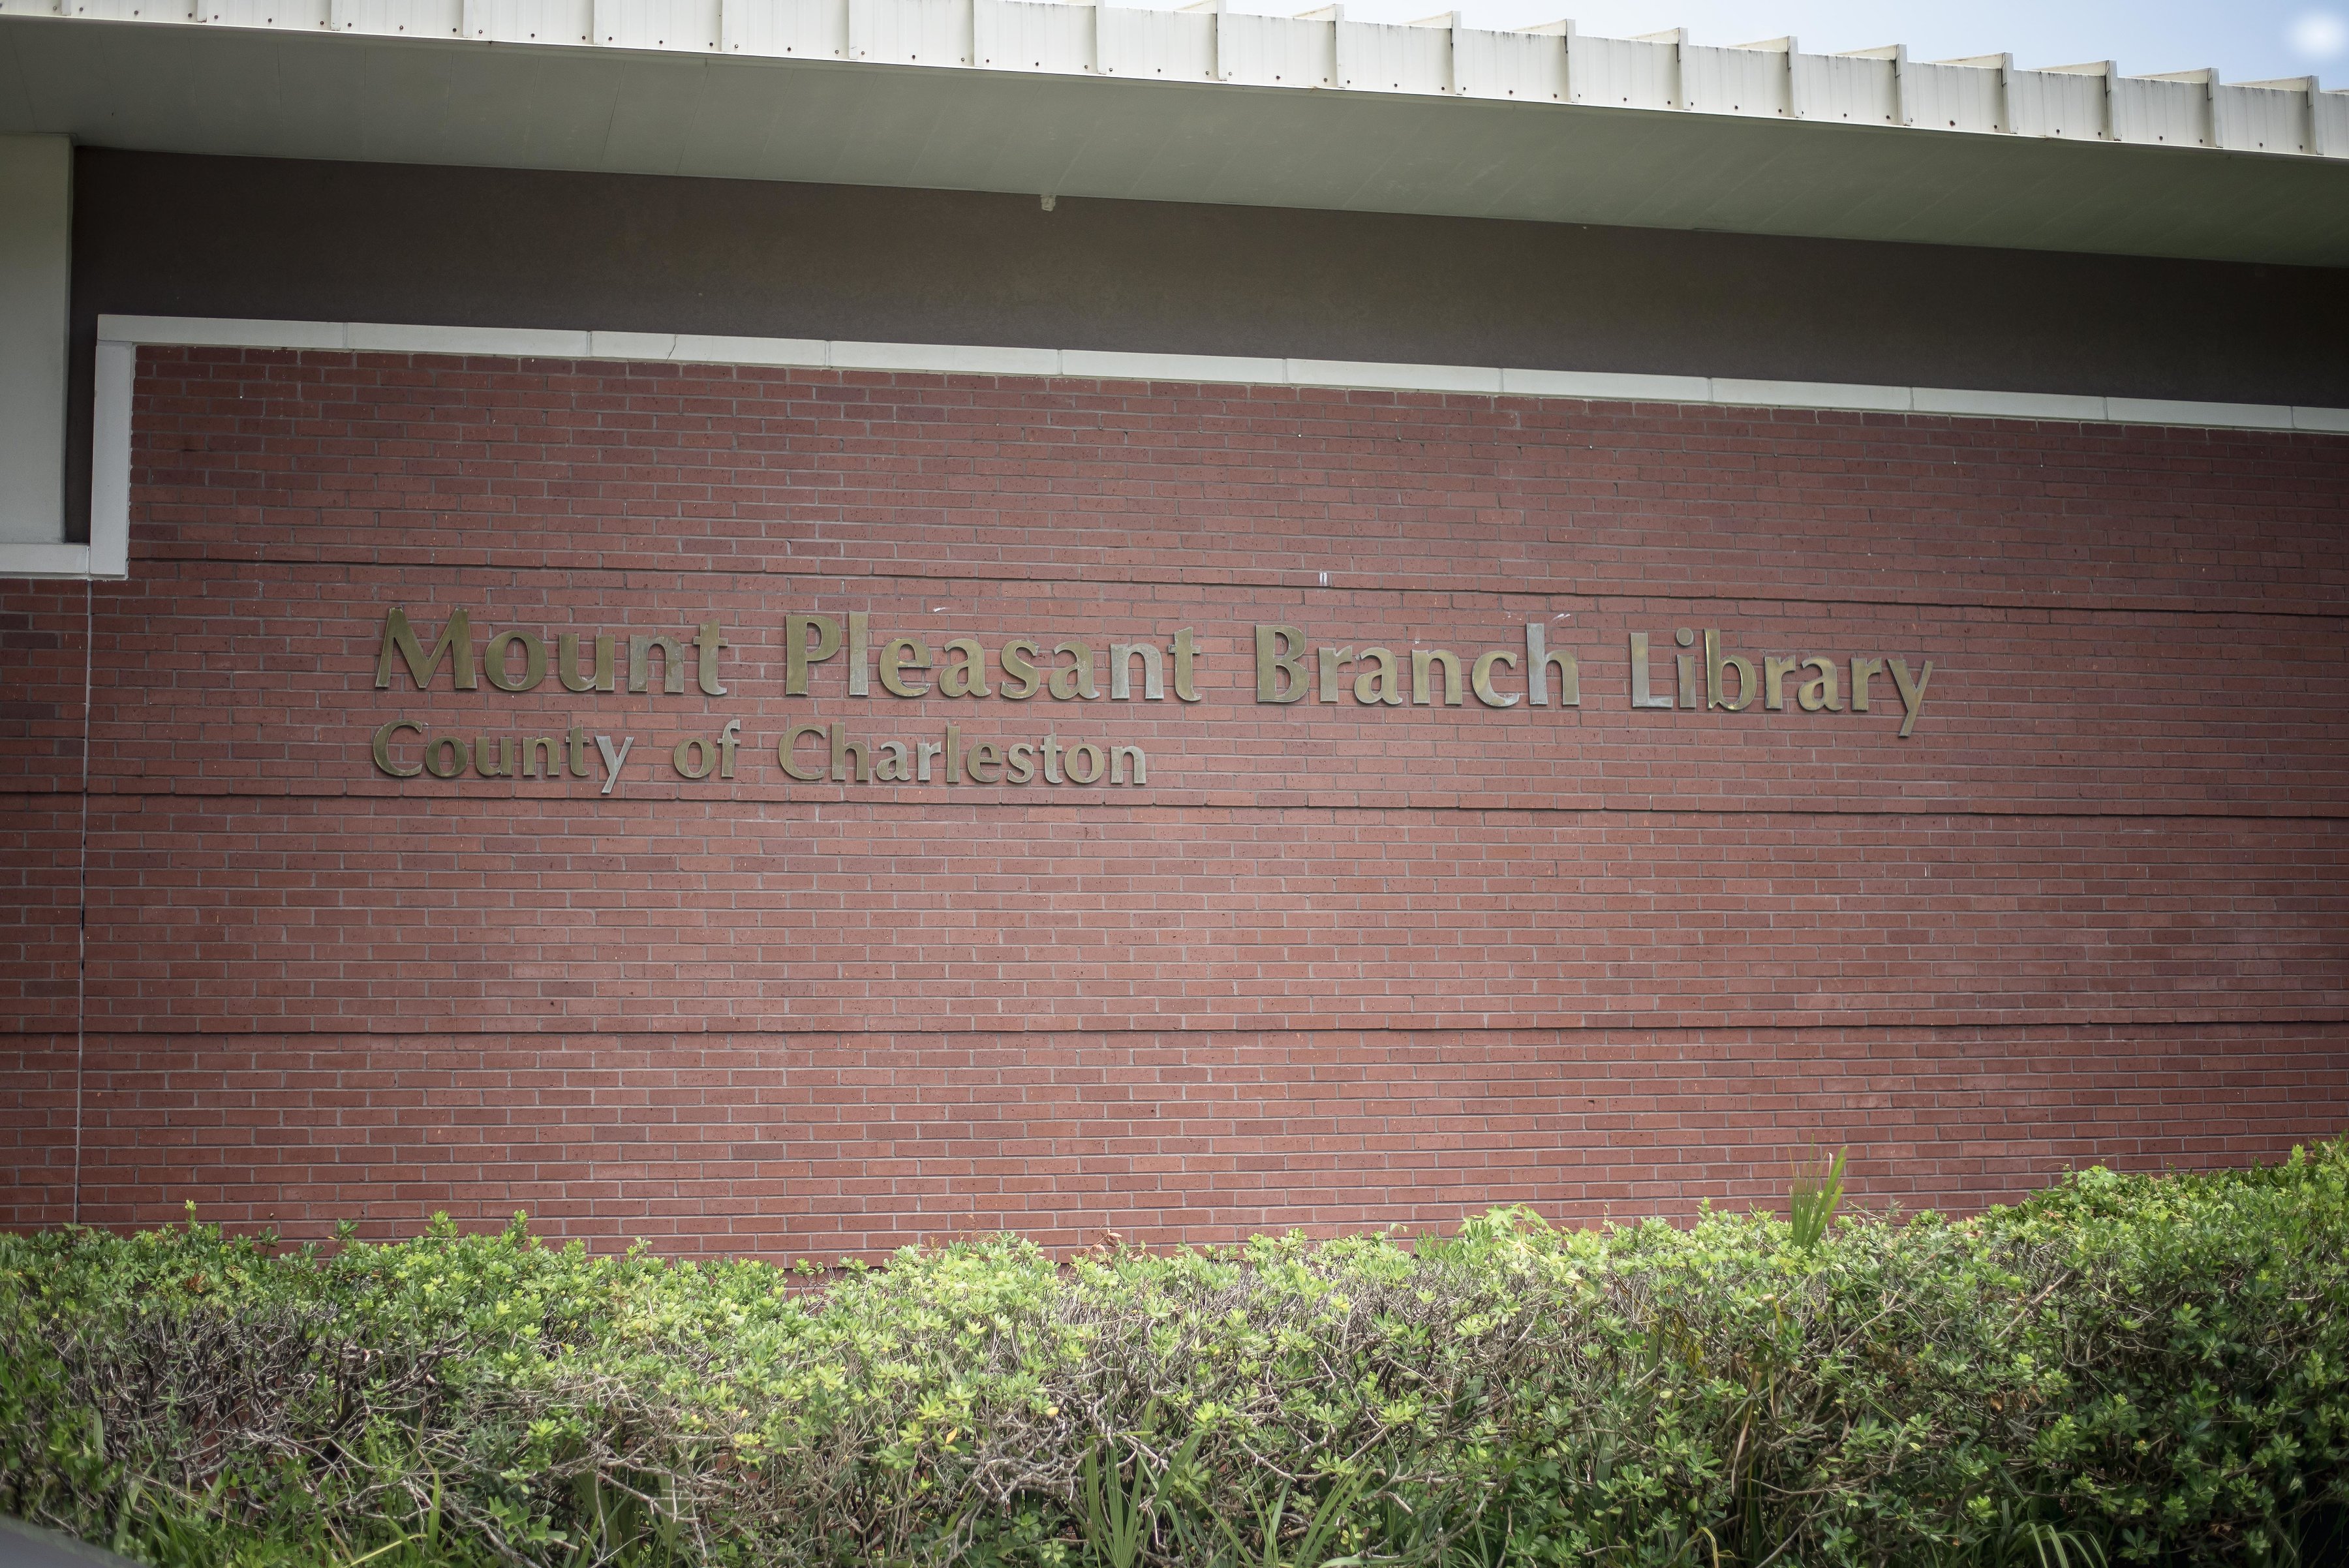 CCPL to close Mt. Pleasant Library for renovation construction as part of referendum-funded project